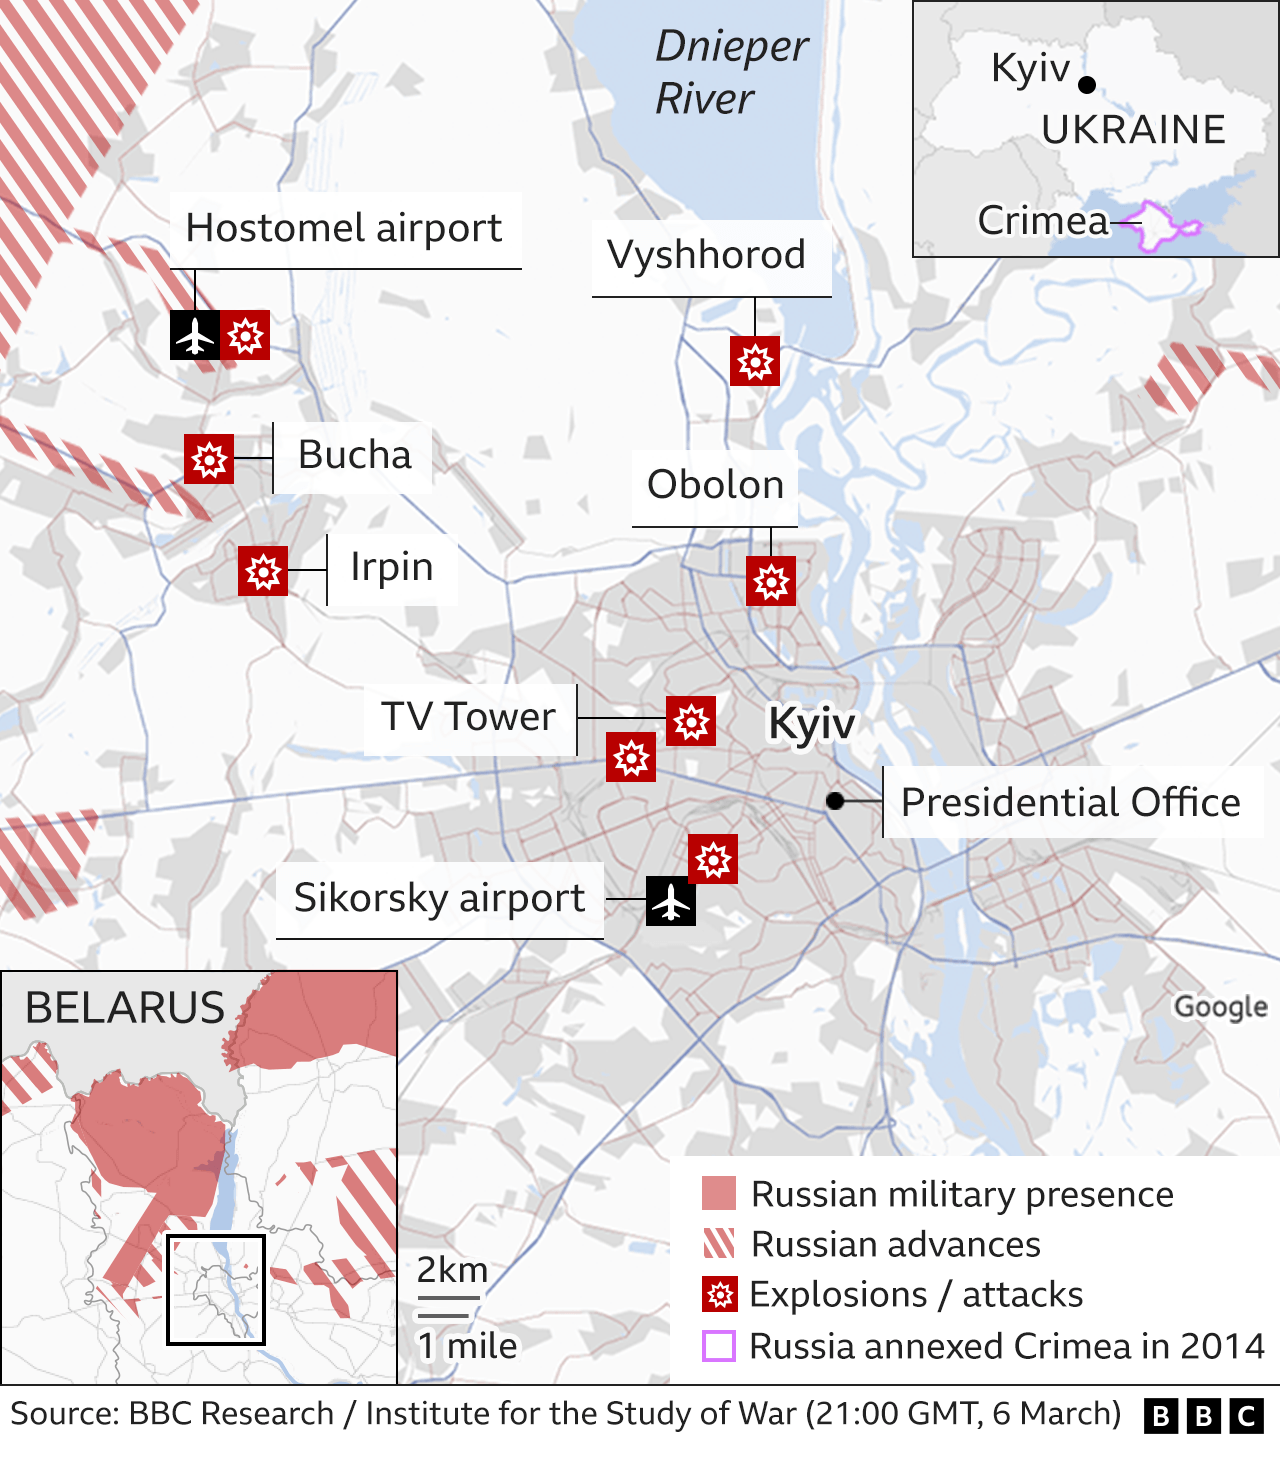 Map showing key locations in Kyiv, with Russian troops just to the north, east and west of the capital. Updated 7 MAR